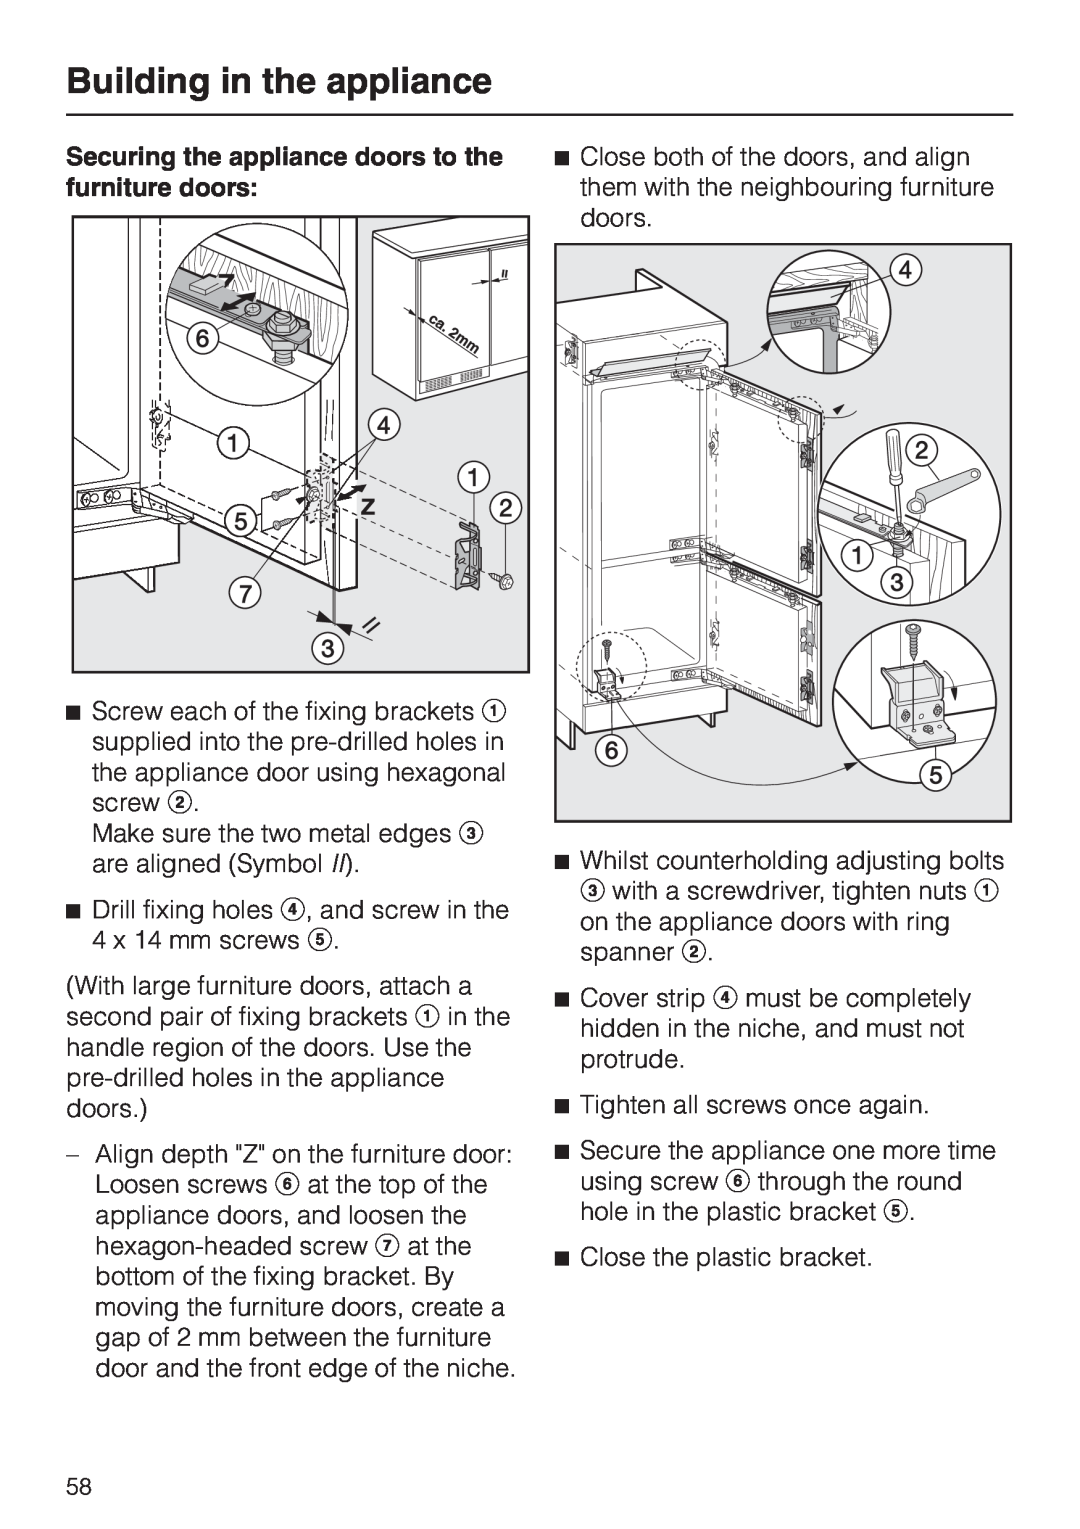 Miele KF 9757 ID installation instructions Building in the appliance, Make sure the two metal edges c are aligned Symbol 